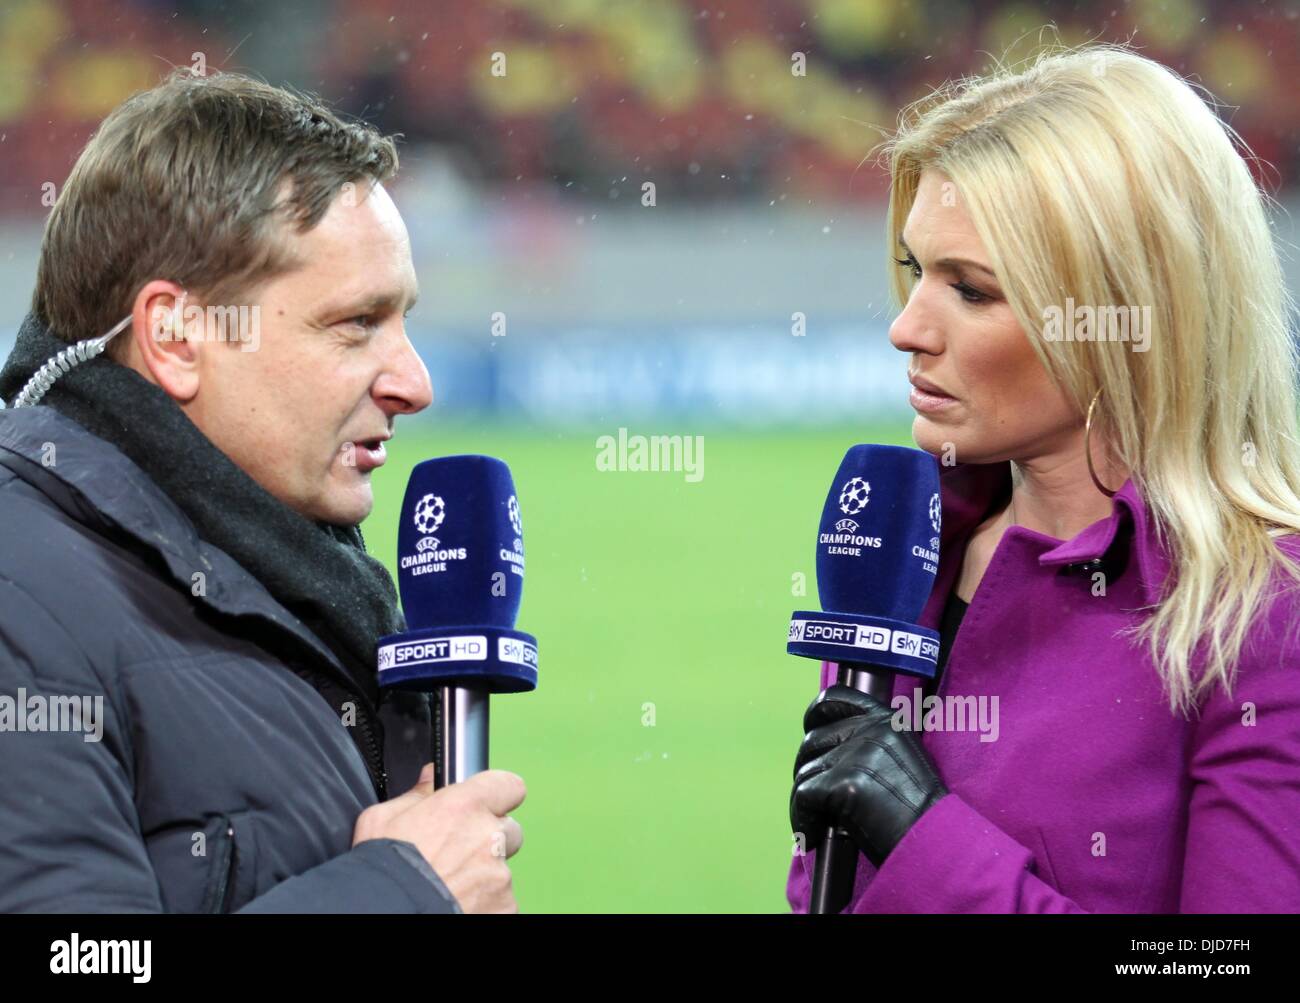 Bucharest, Romania. 26th Nov, 2013. Managing director Horst Heldt (L) of Schalke is interviewed by Jessica Kastrop prior to the UEFA Champions League Group E soccer match between FC Steaua Bucharest and FC Schalke 04 at National Arena stadium, in Bucharest, Romania, 26 November 2013. Photo: Friso Gentsch/dpa/Alamy Live News Stock Photo